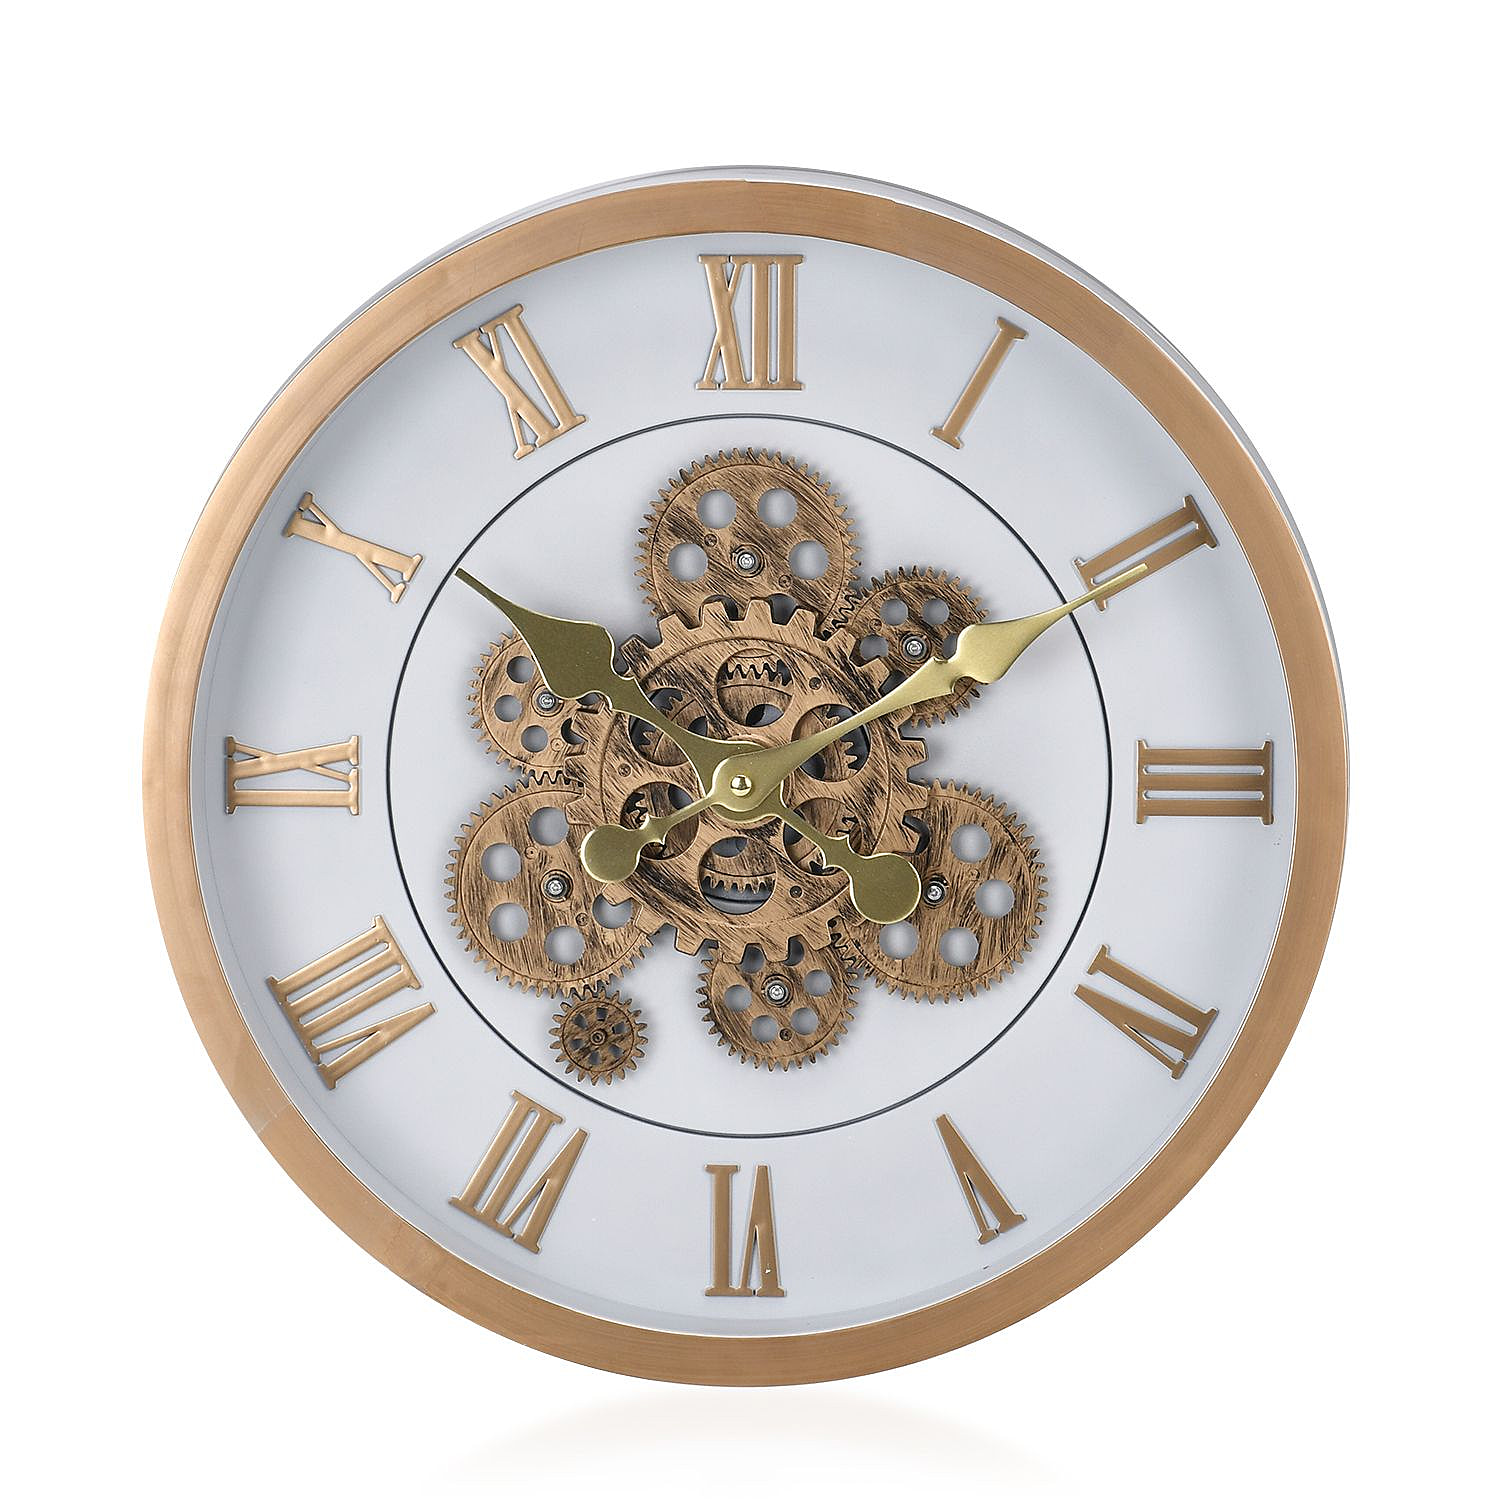 Lsrge Vintage Turning Gears Wall Clock with Large Roman Numerals (Size 40 cm) - Whitr